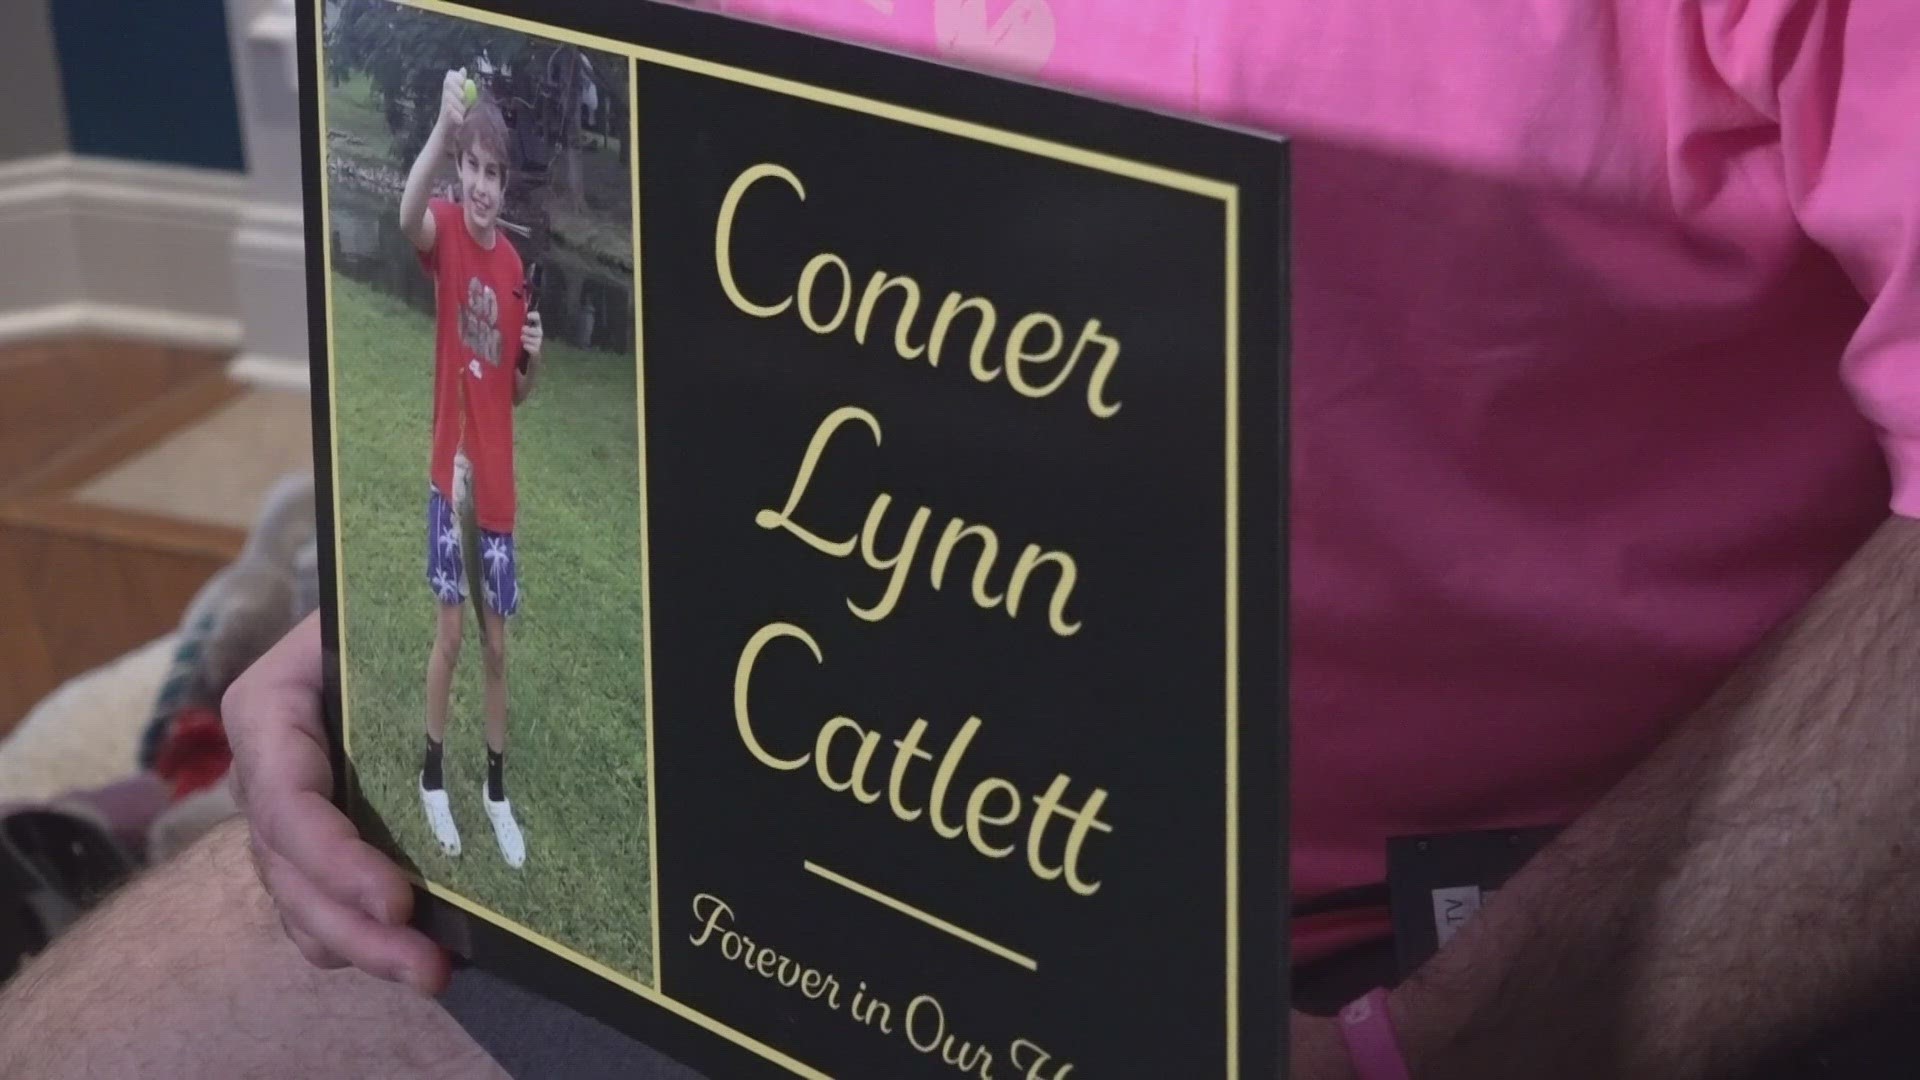 Conner Catlett would have turned 13 years old on Thursday.